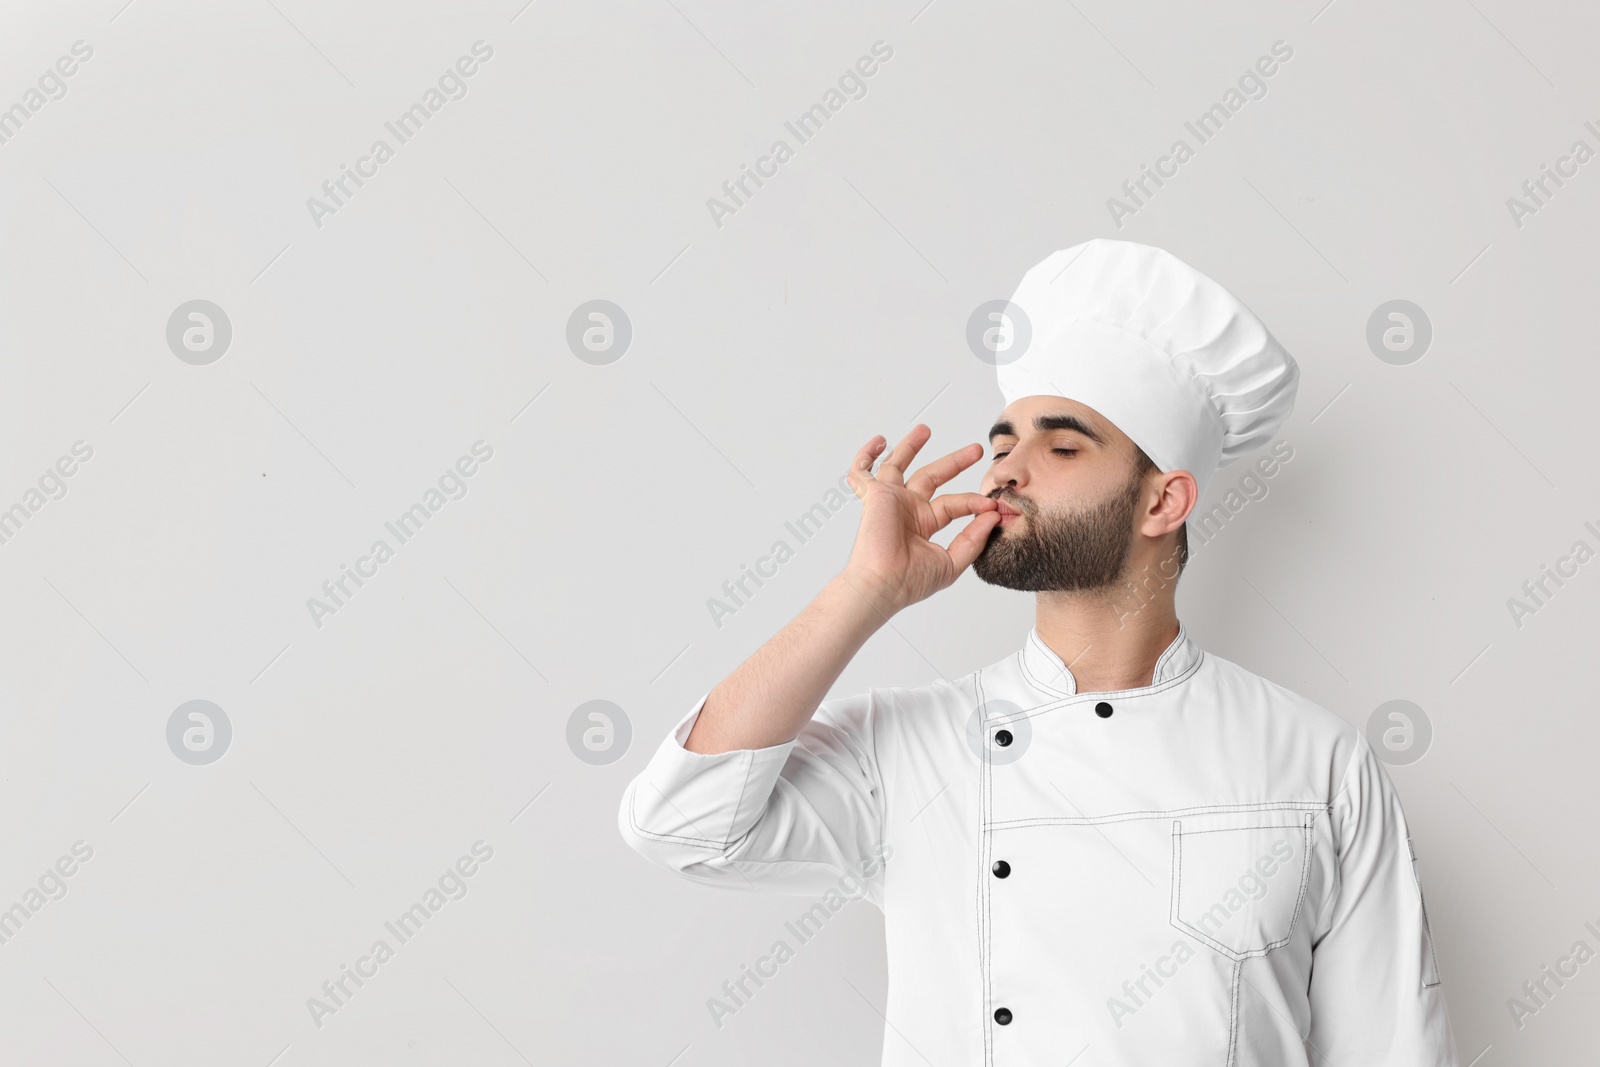 Photo of Professional chef showing perfect sign on white background